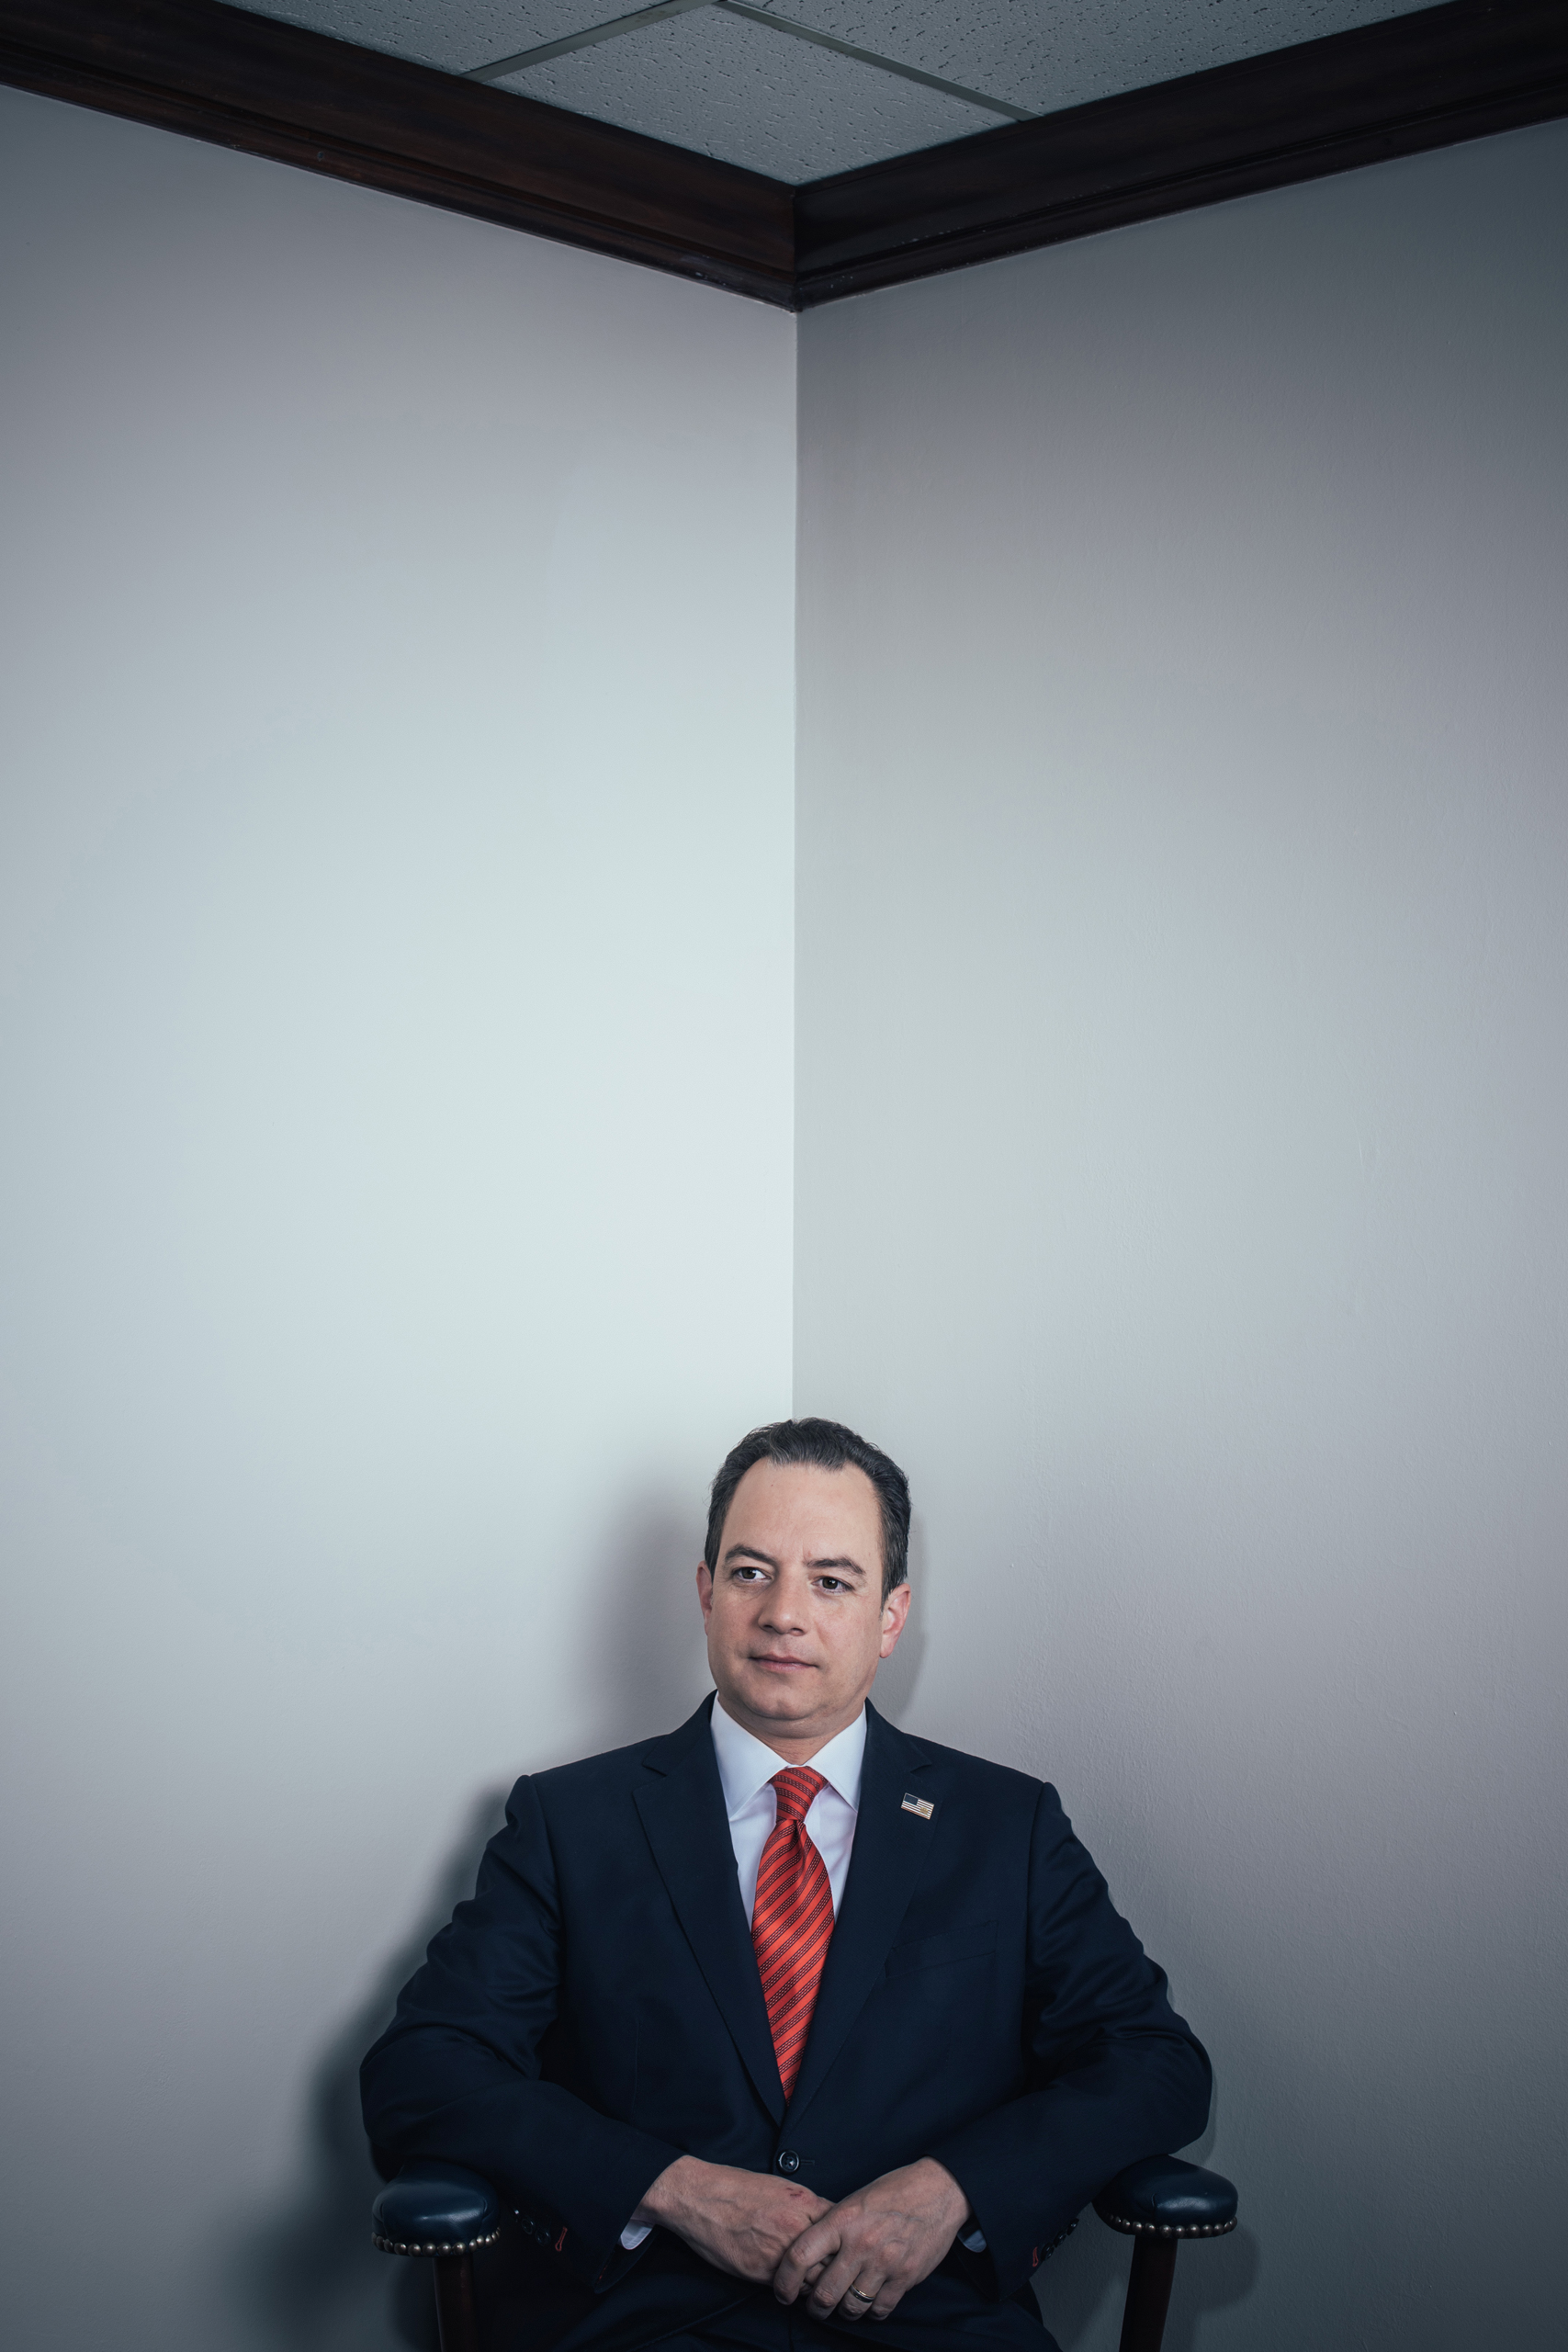 Priebus rejects GOP critics who say he should have done more to stop Trump (Photograph by Stephen Voss for TIME)